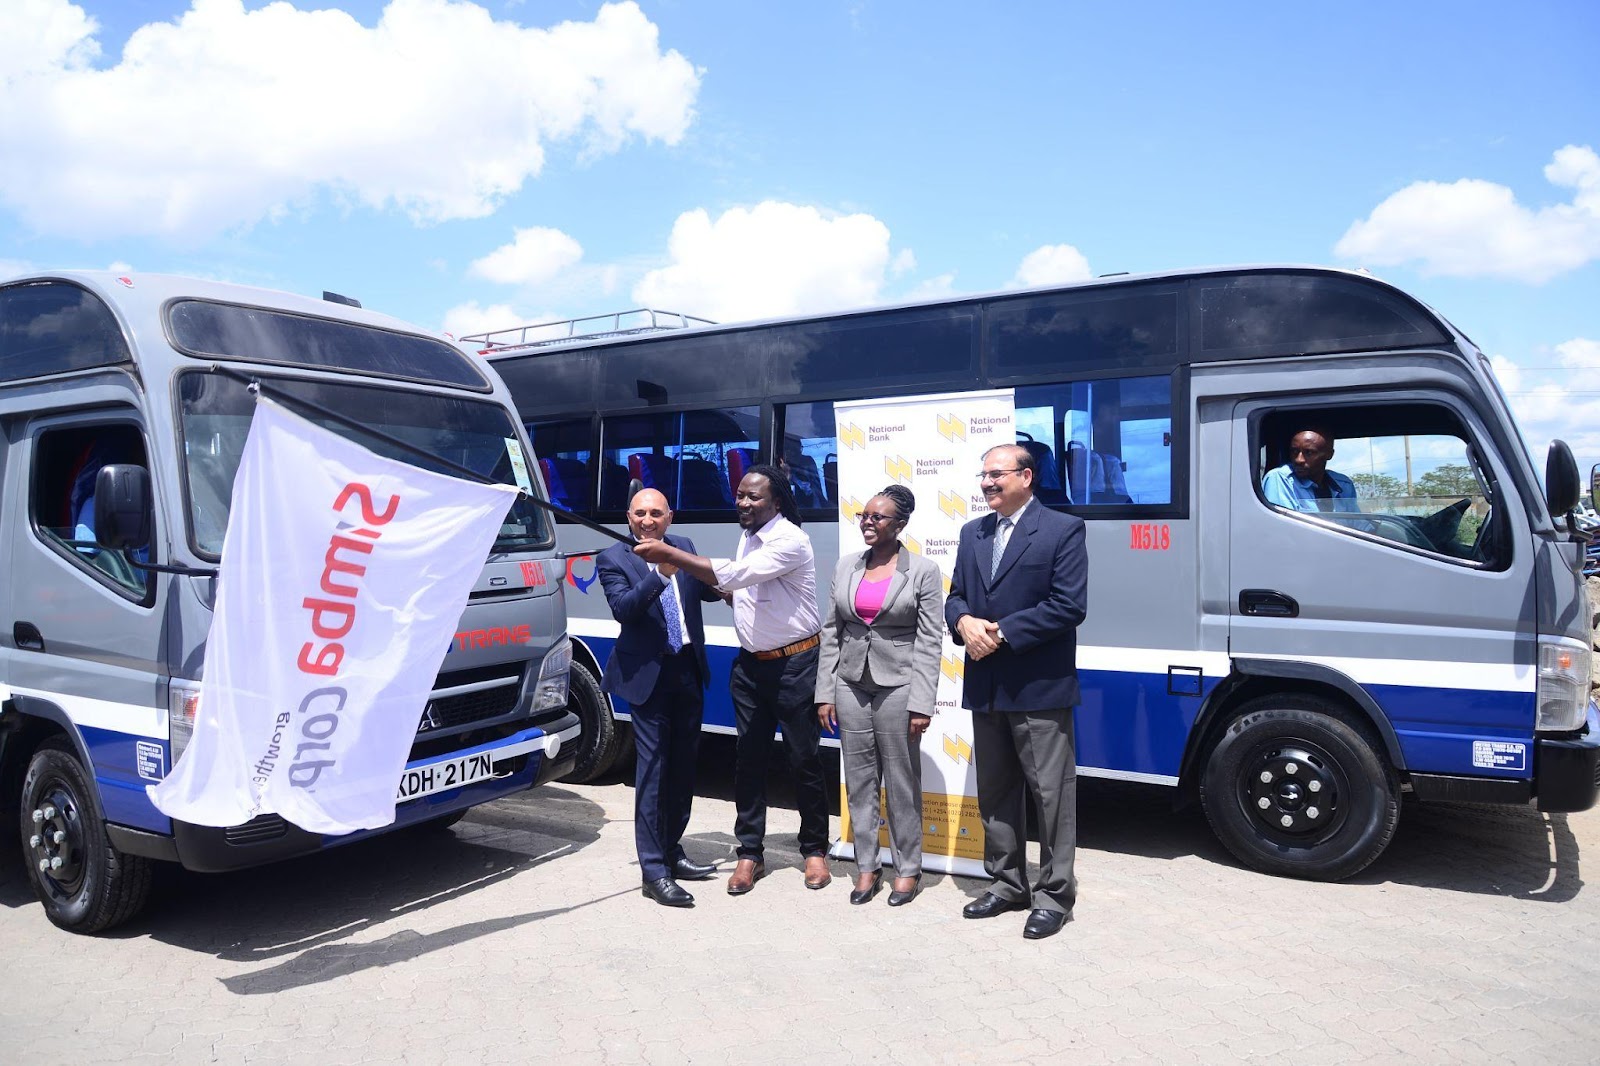 Mehul Sachdev, Pick ups and Buses Product Manager Simba Corp, MetroTrans CEO Oscar Rosanna, Caroline Rutto, Director of Retail, National Bank of Kenya and Naresh Leekha, MD Motors, Simba Corp Ltd flag off a fleet of brand new Fuso buses which handed over to Metro Trans Ltd.